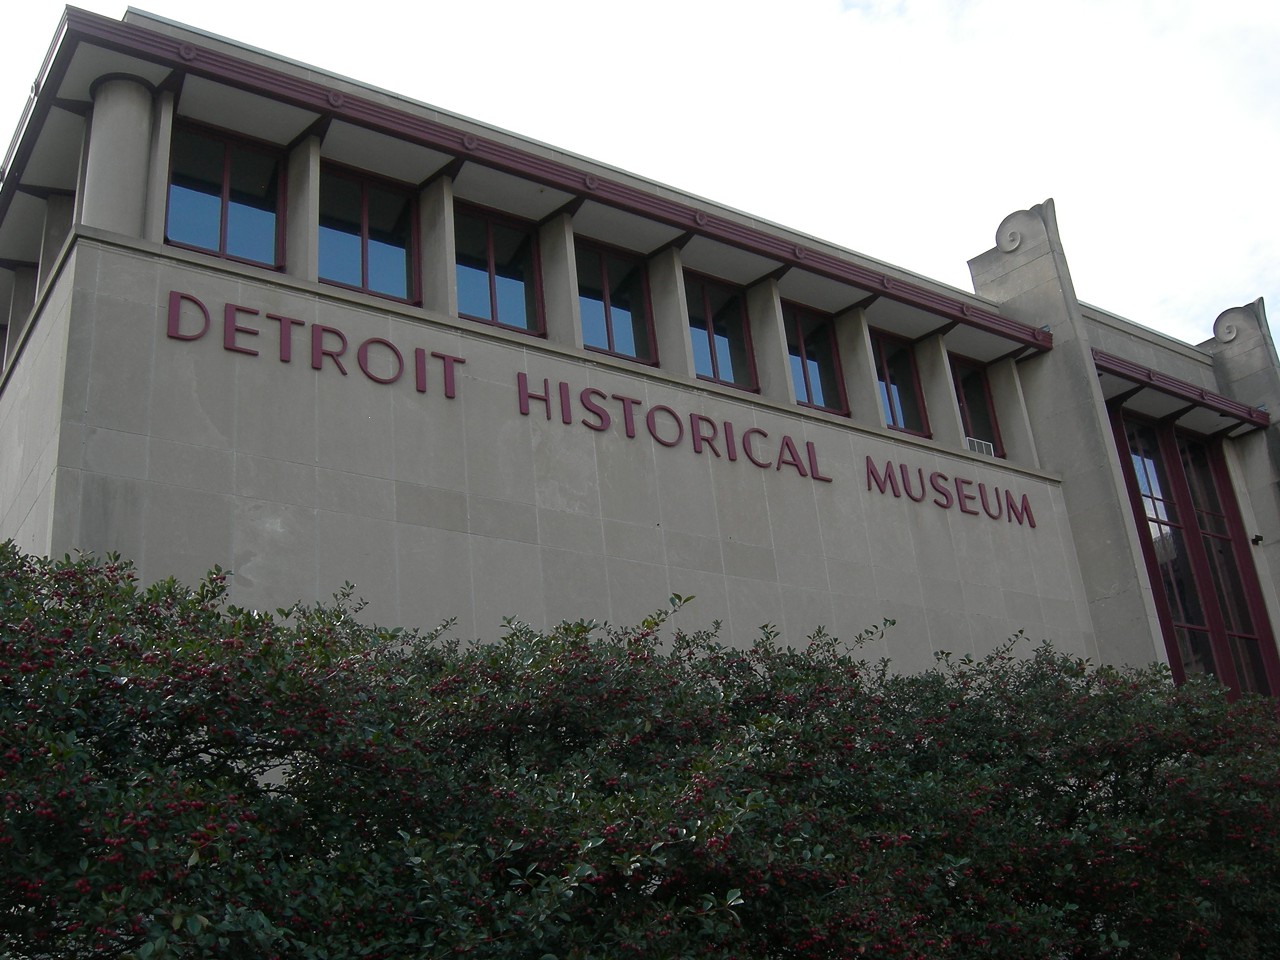 70) Visit Detroit’s Historical Museum: Fresh off a revamp, the Detroit Historical Museum boasts fresh exhibits, expanded display area, and absolutely free admission, so there’s no reason not to go. But unchanged by the renovations are the Streets of Old Detroit down in the basement, where you can trod cobblestones and see what the city looked like ages ago. Don’t pass up the past again.